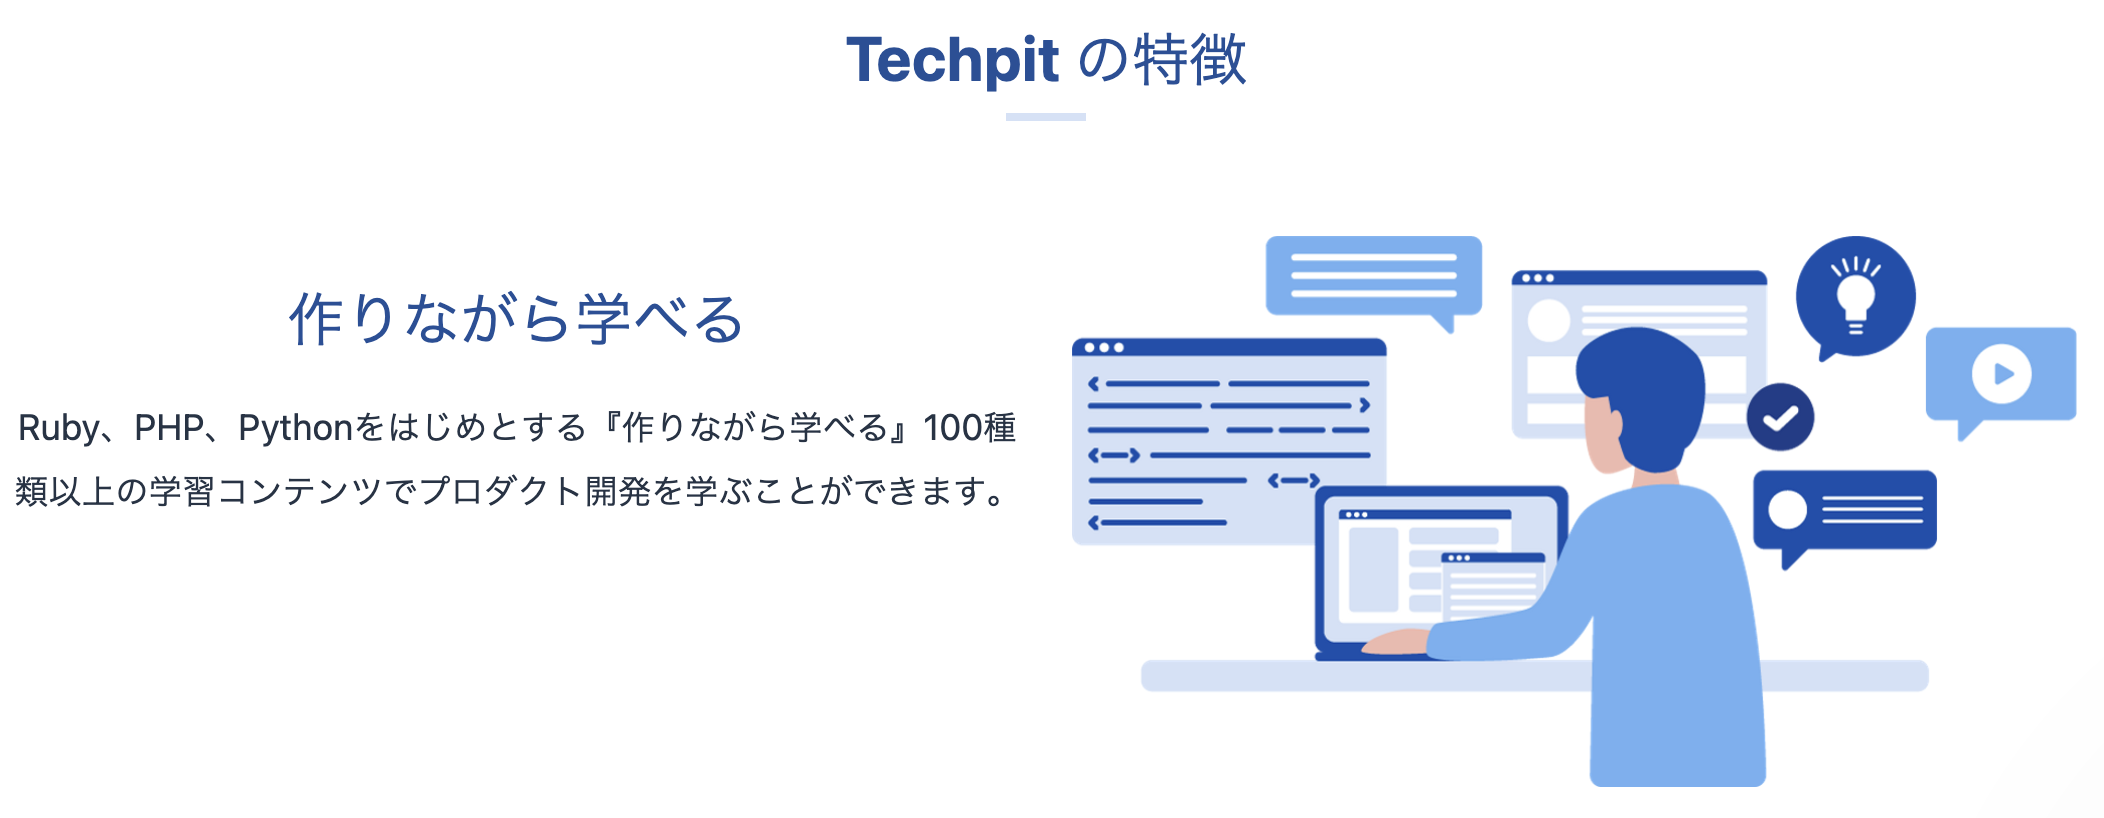 Techpit.png